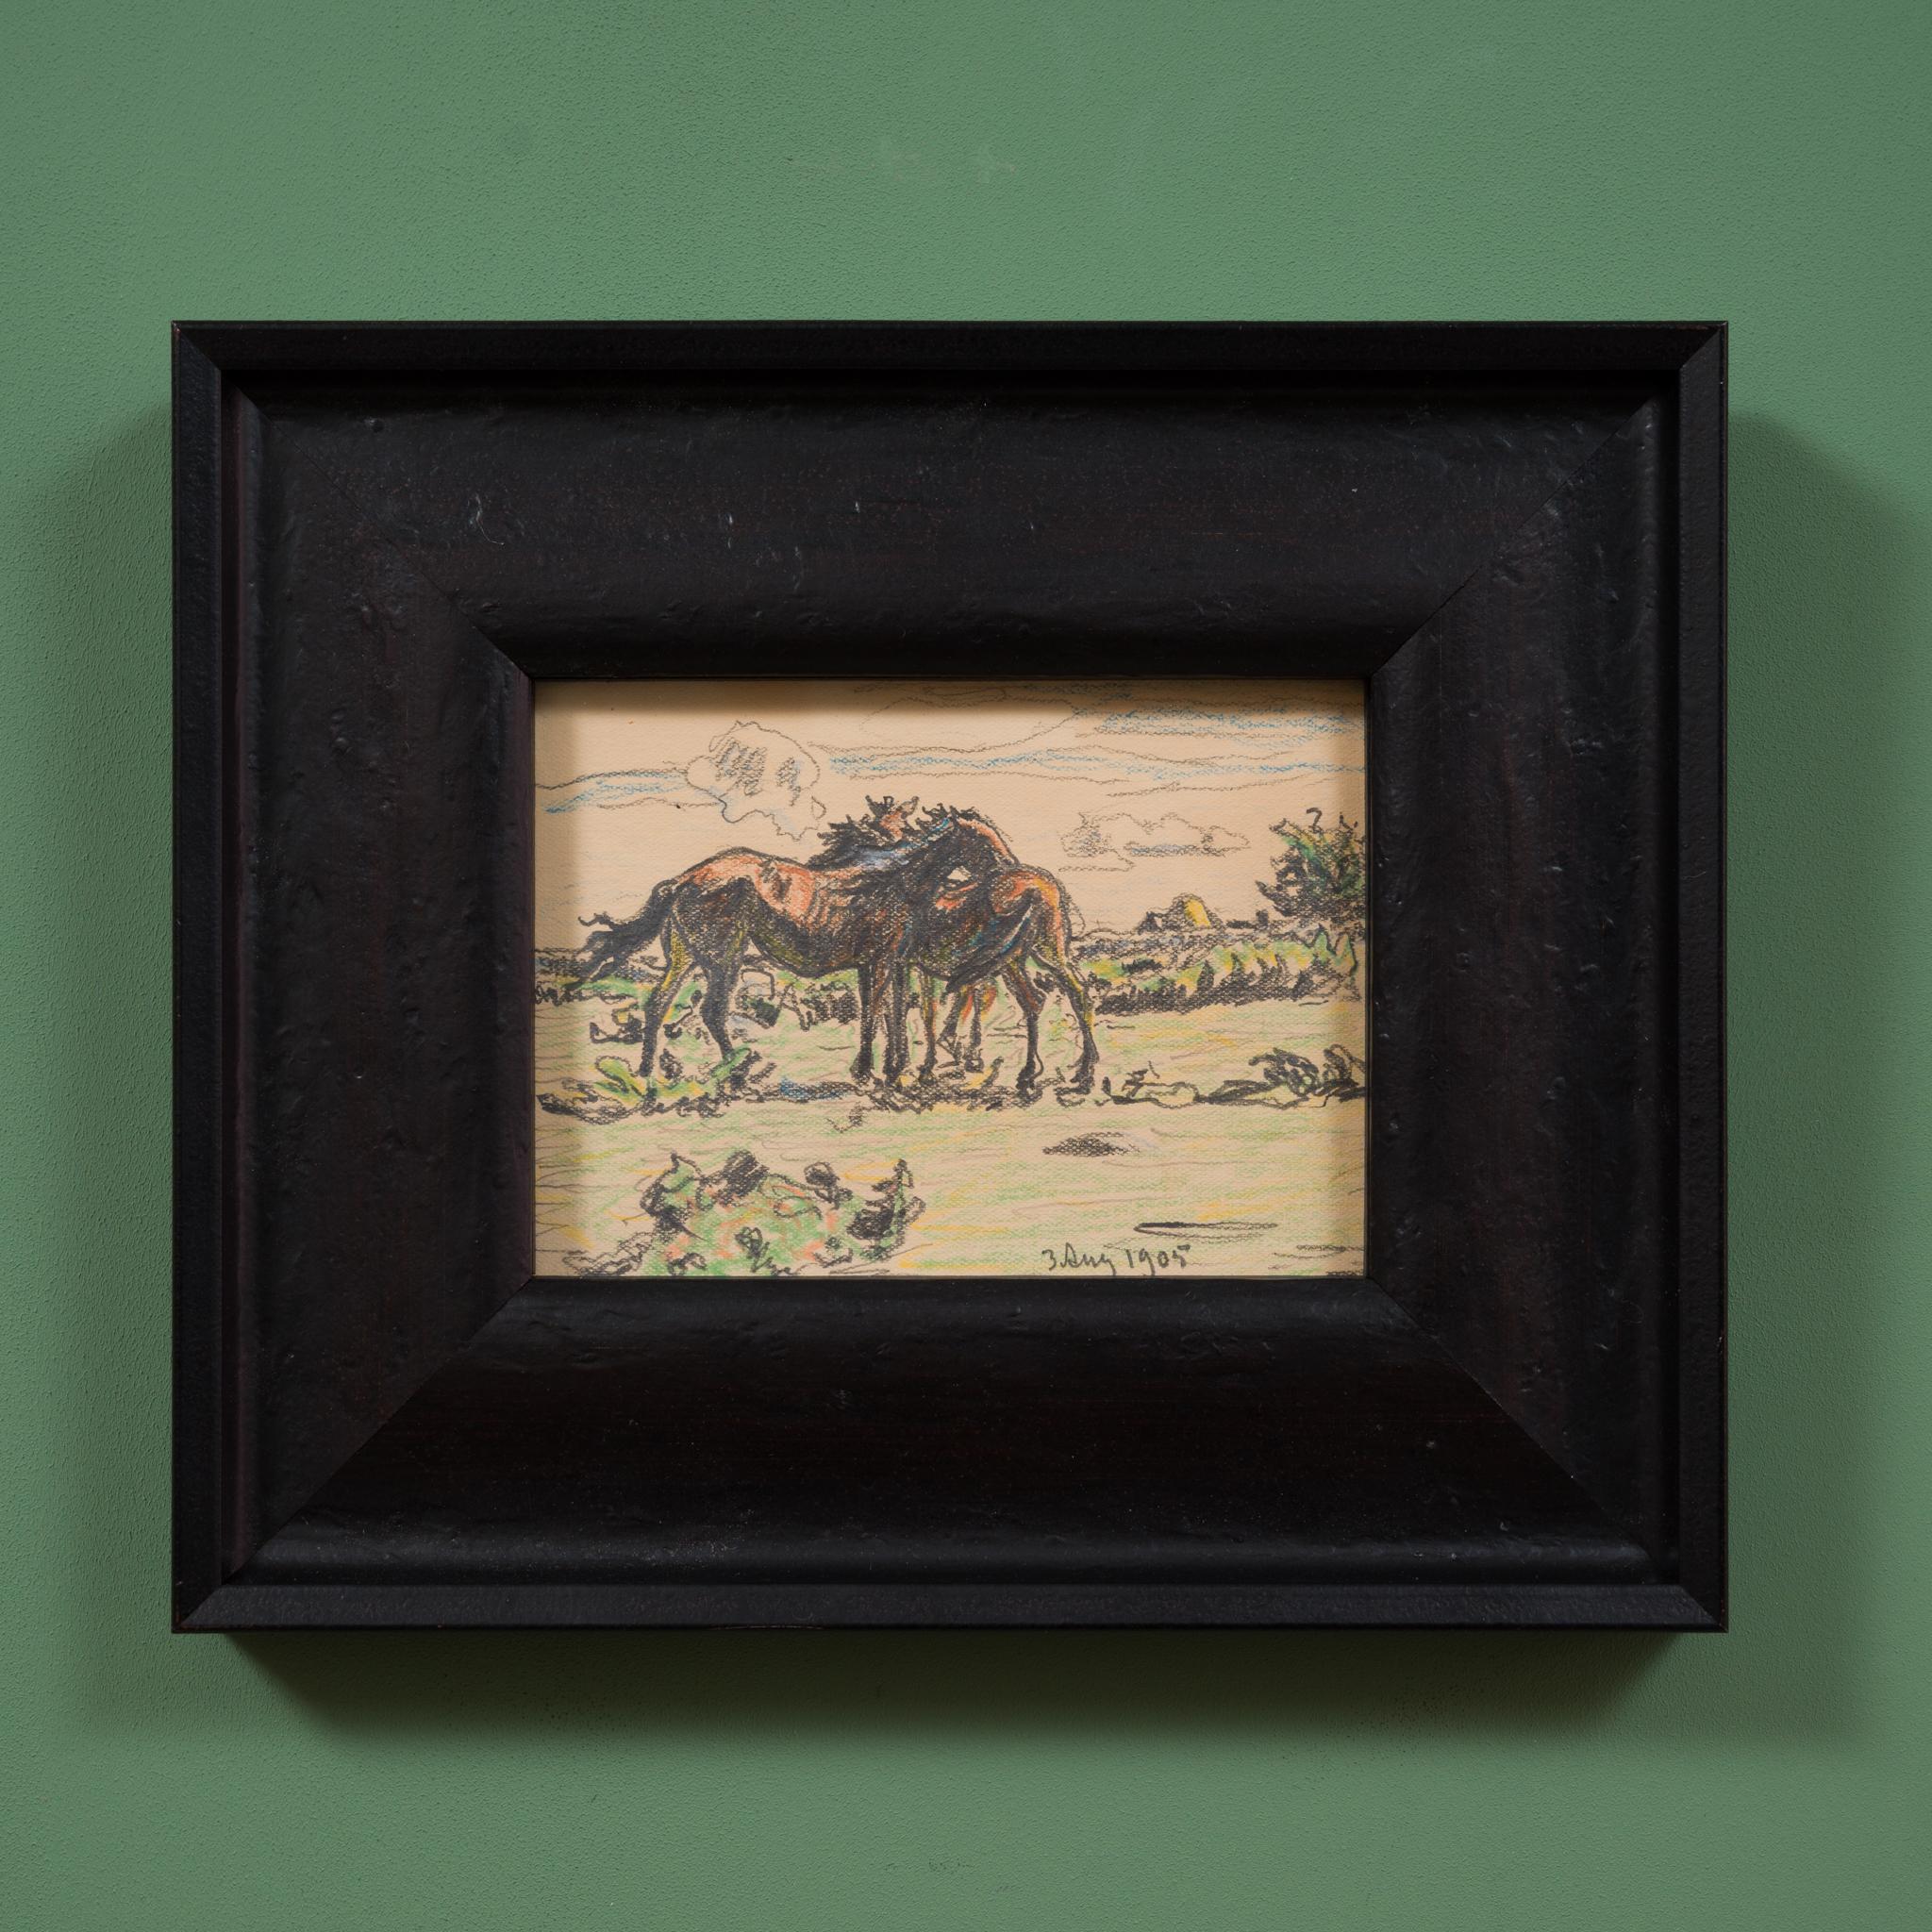 This pastel drawing by Nils Kreuger, dating from 1905, presents an intimate moment between two horses that appear to be embracing each other. The use of pastel chalks is confident, imbuing the scene with a soft yet vibrant energy that reflects the